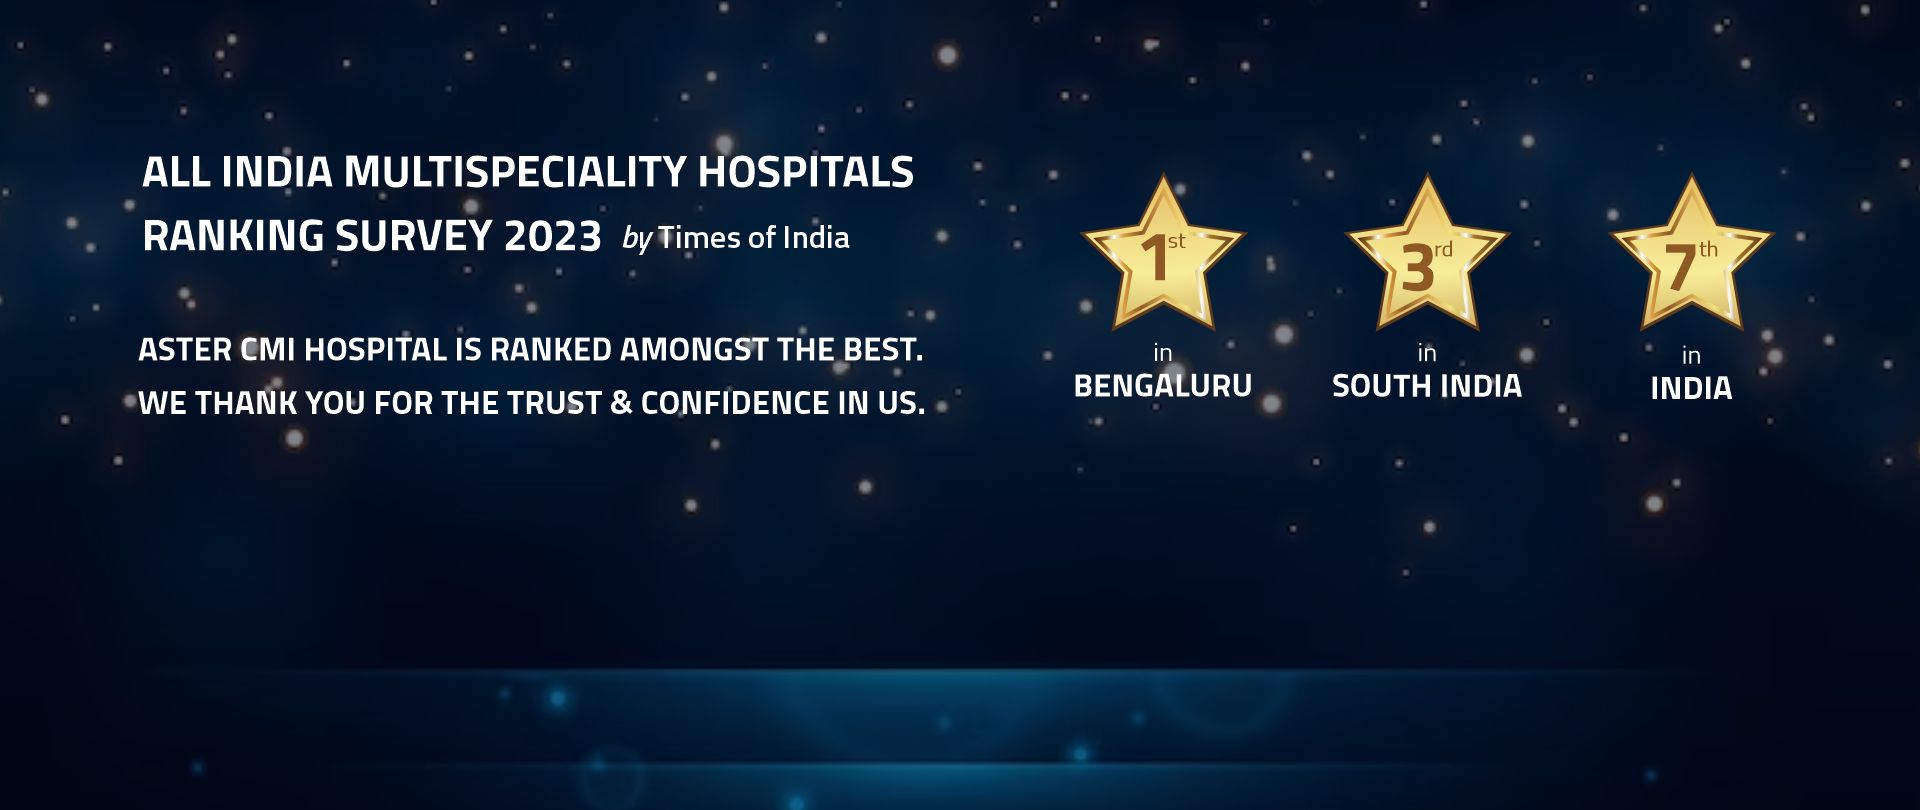 Times of India Awards Best Hospital in Bangalore to Aster CMI Hospital